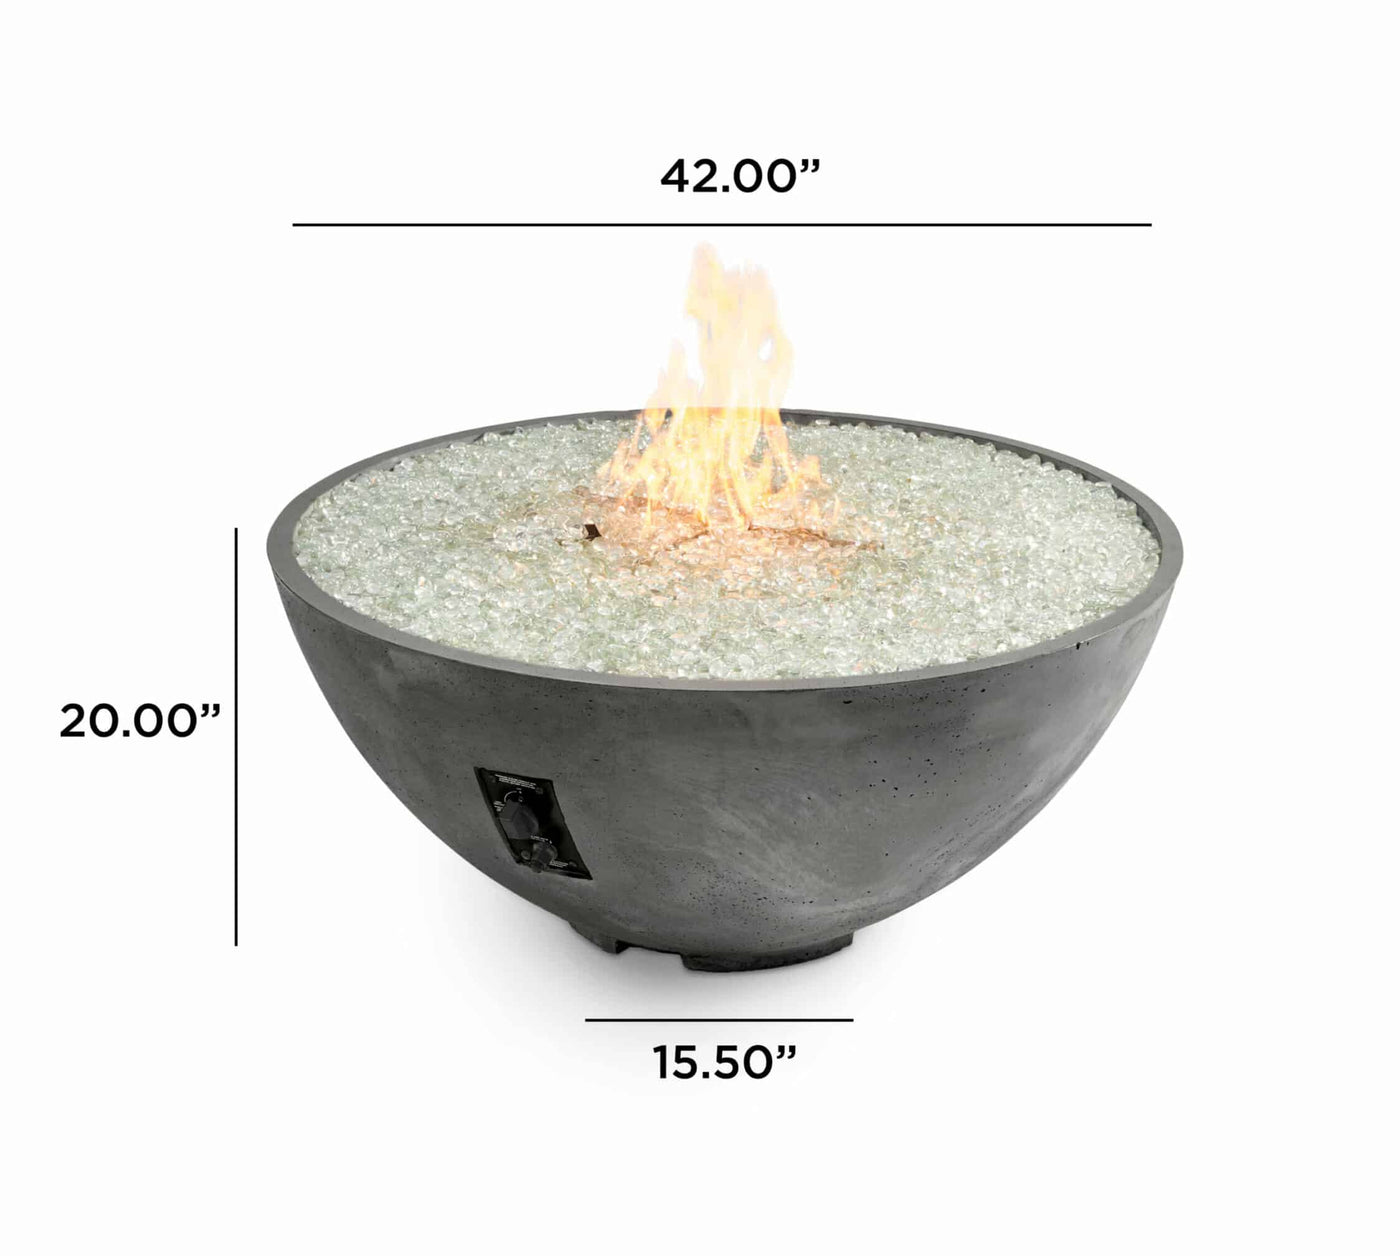 The Outdoor GreatRoom Company Midnight Mist Cove Edge 42" Round Gas Fire Pit Bowl